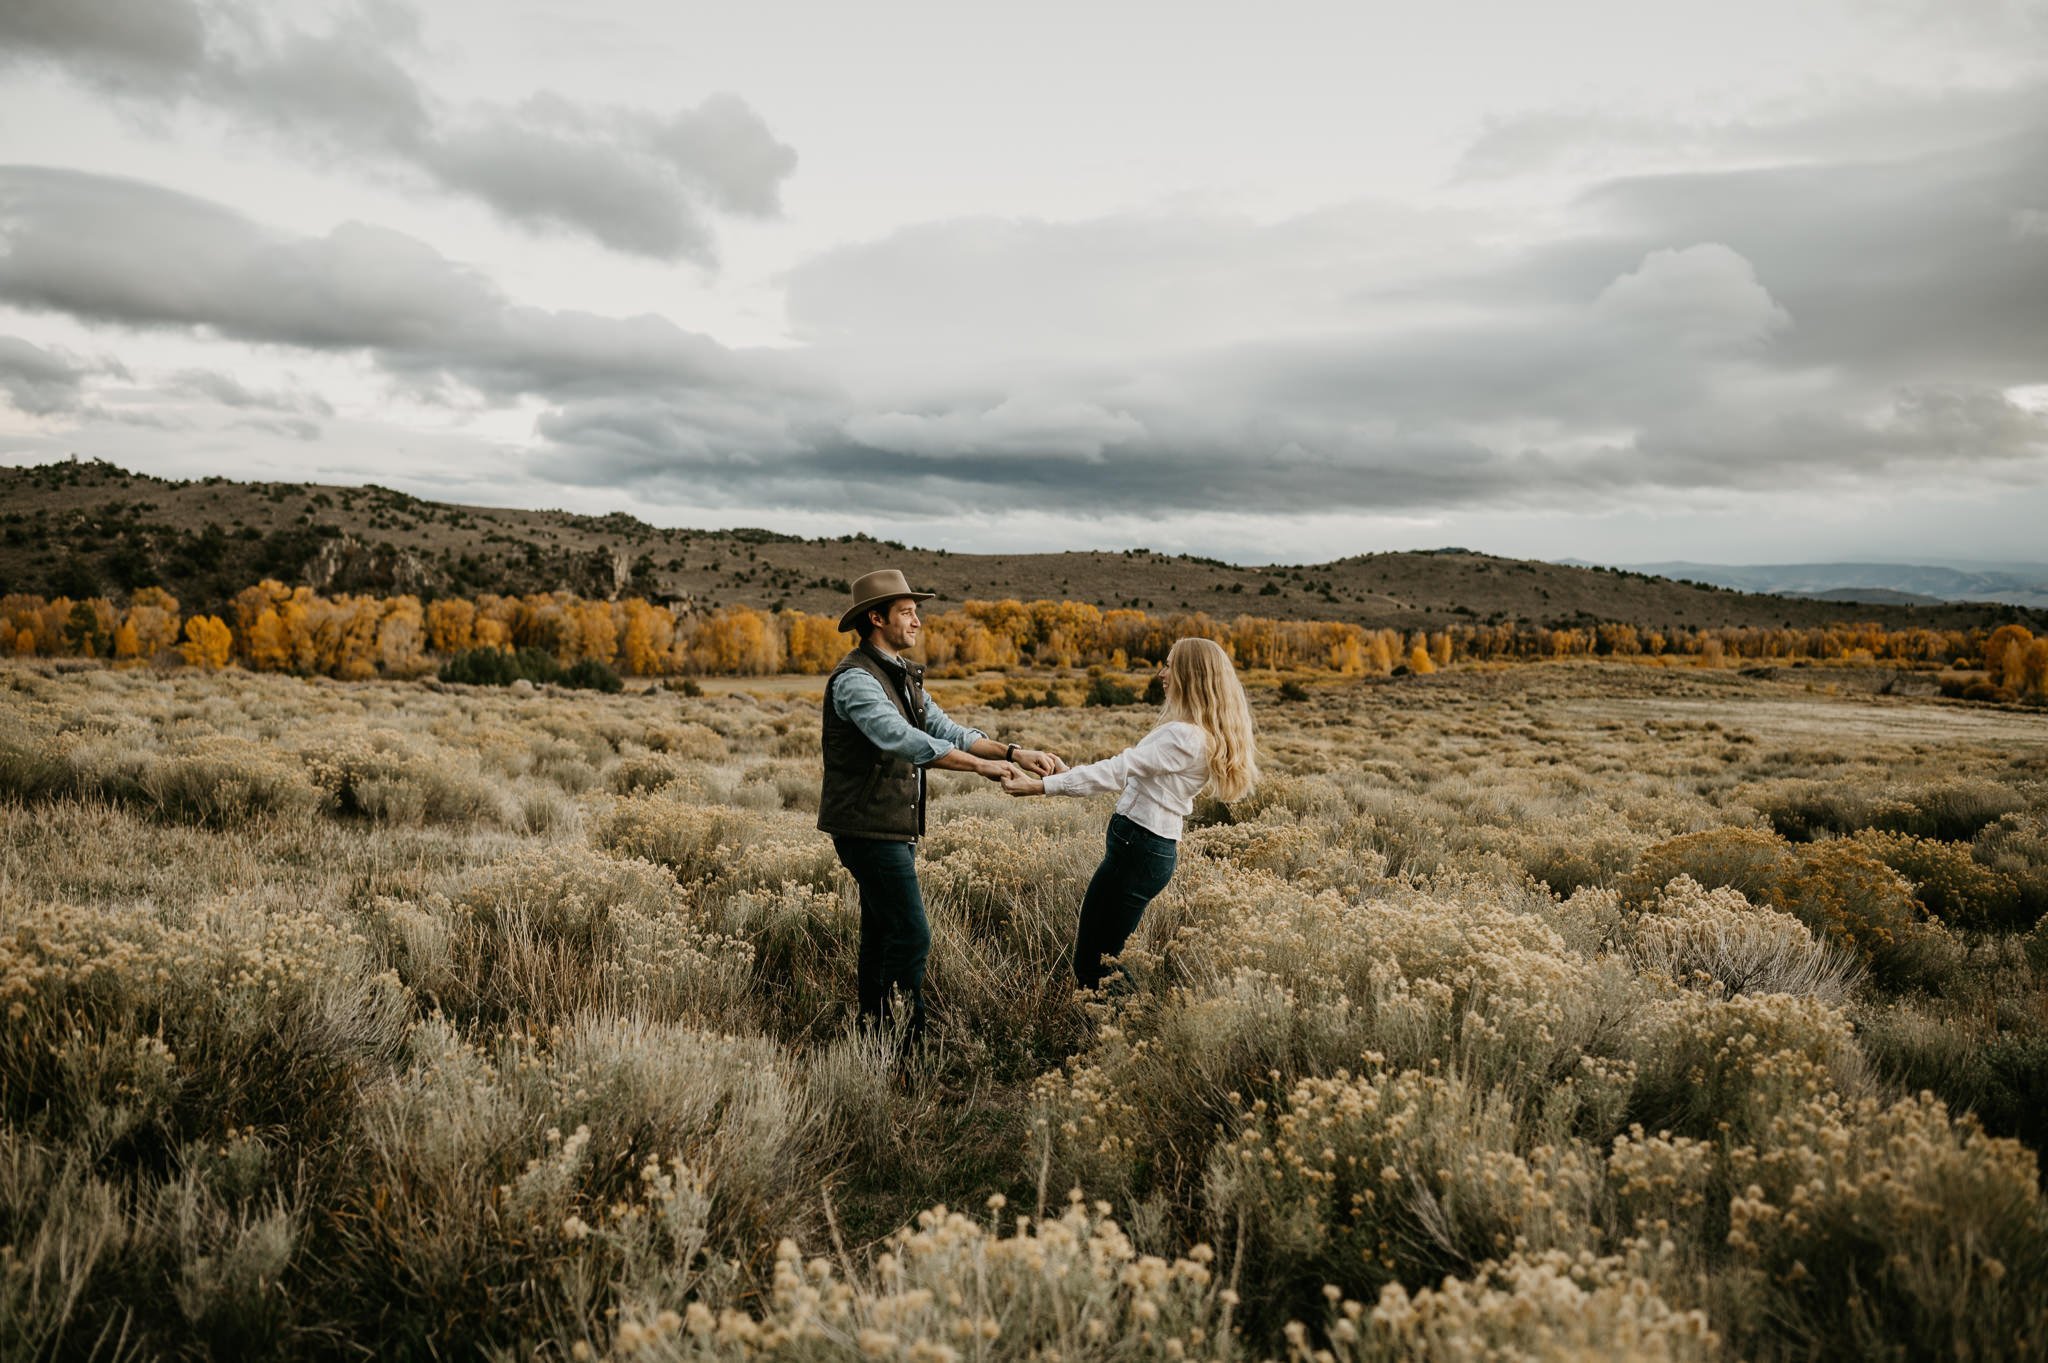 Wyoming wedding, couple dancing in a grassy field with the big cloudy grey skies.